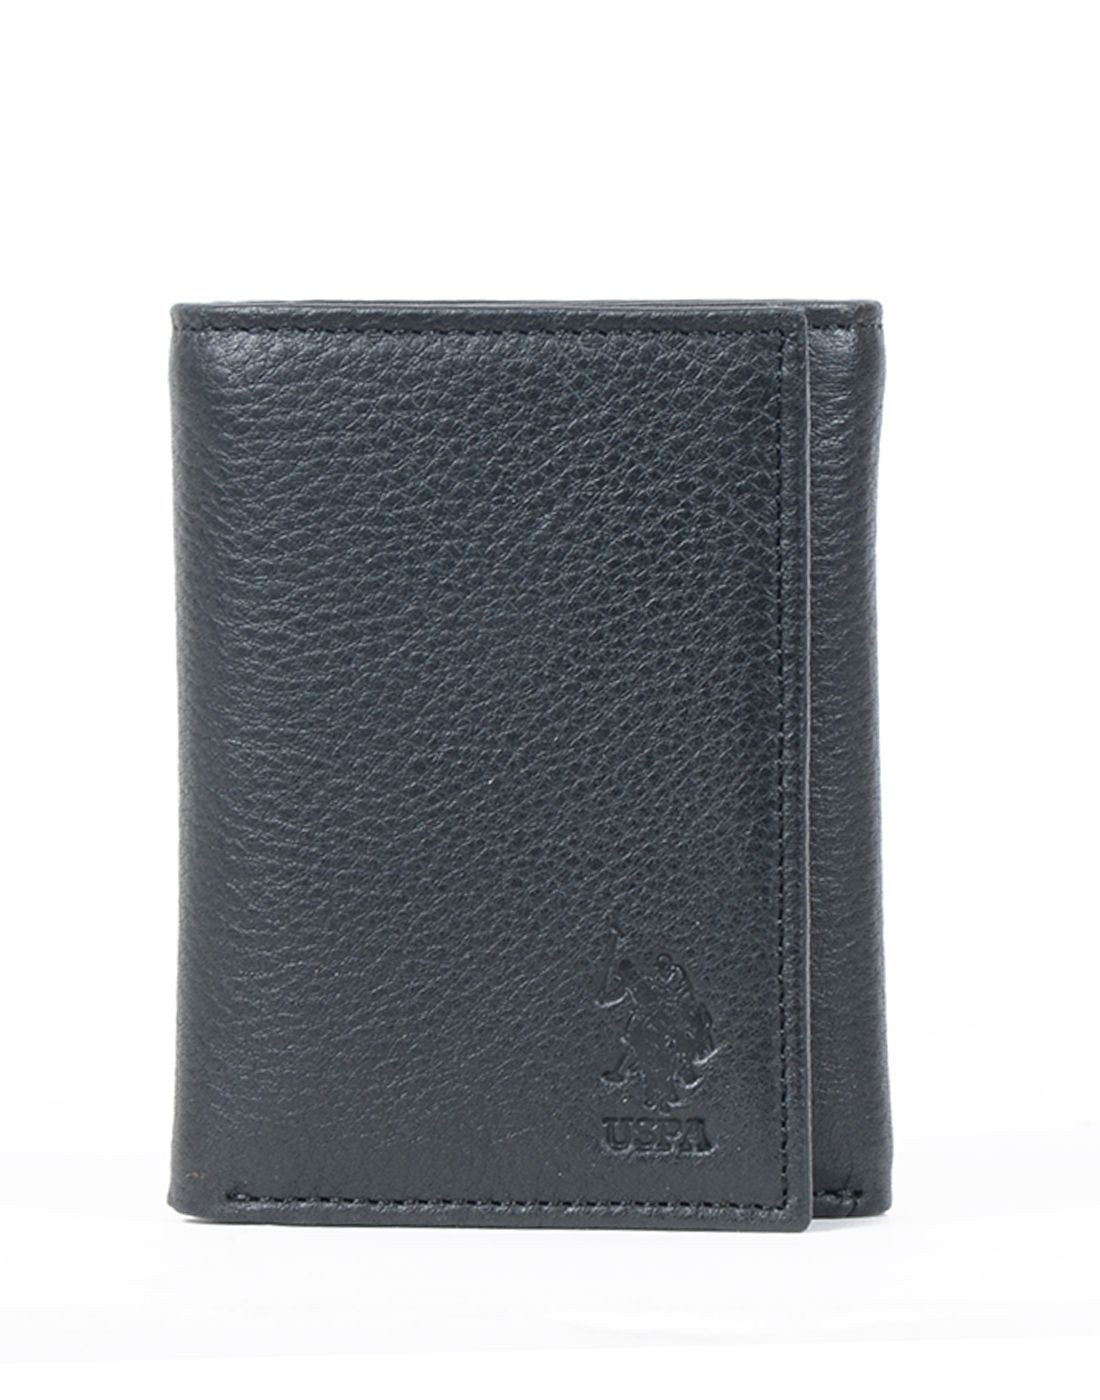 U.S. Polo Assn. Leather Black Casual Regular Wallet: Buy Online at Low